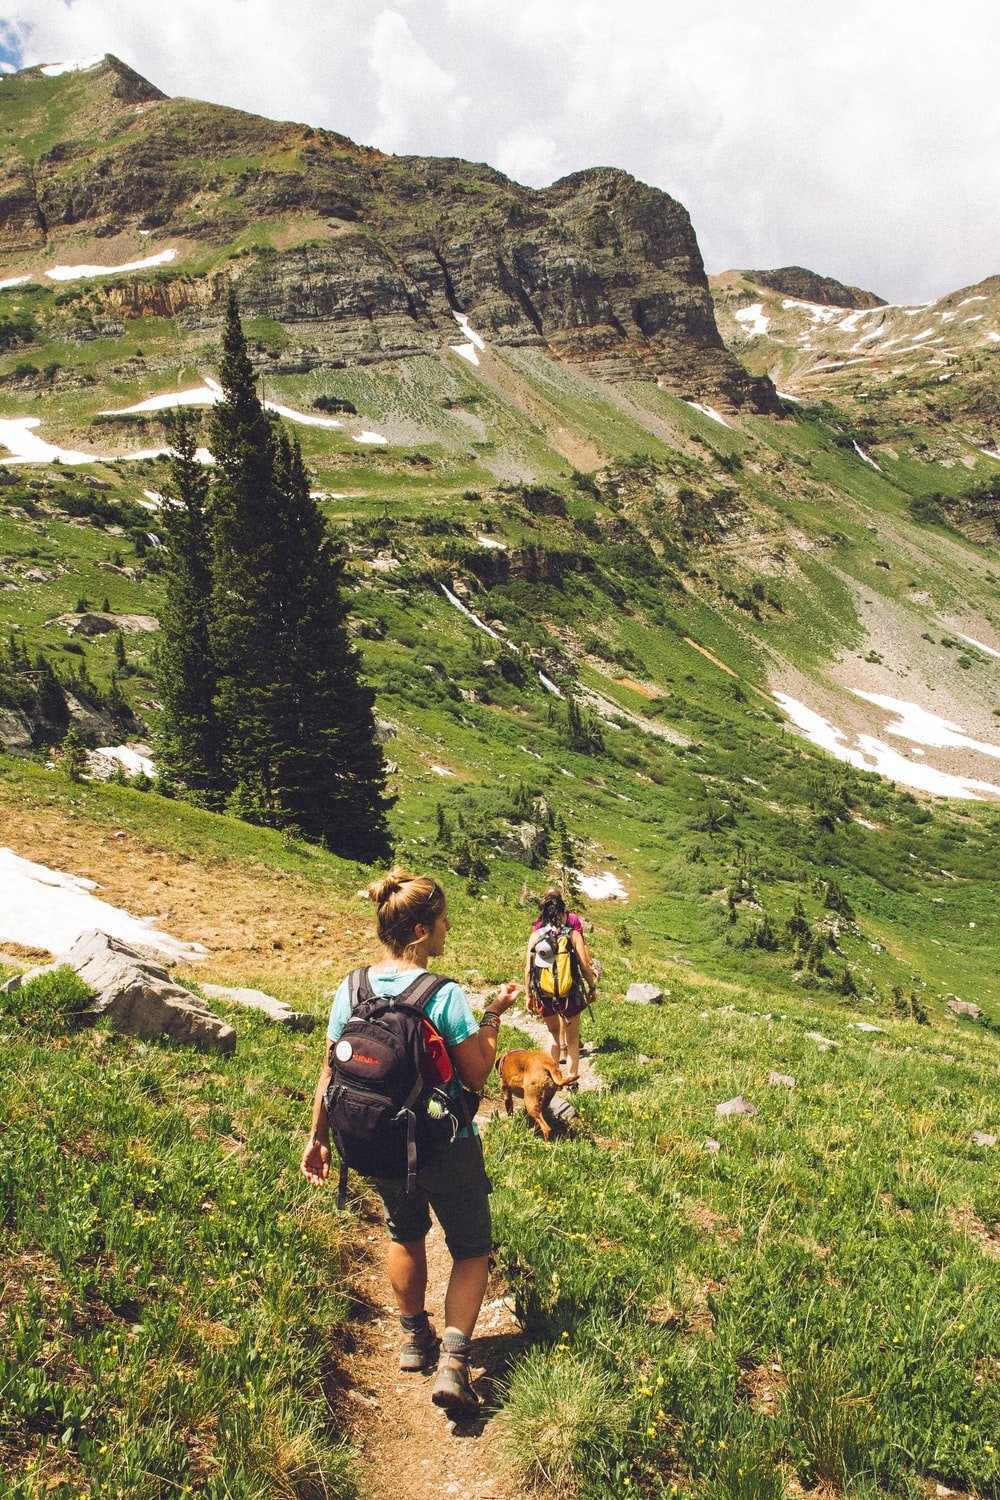 Women Hiking Picture. Download Free Image